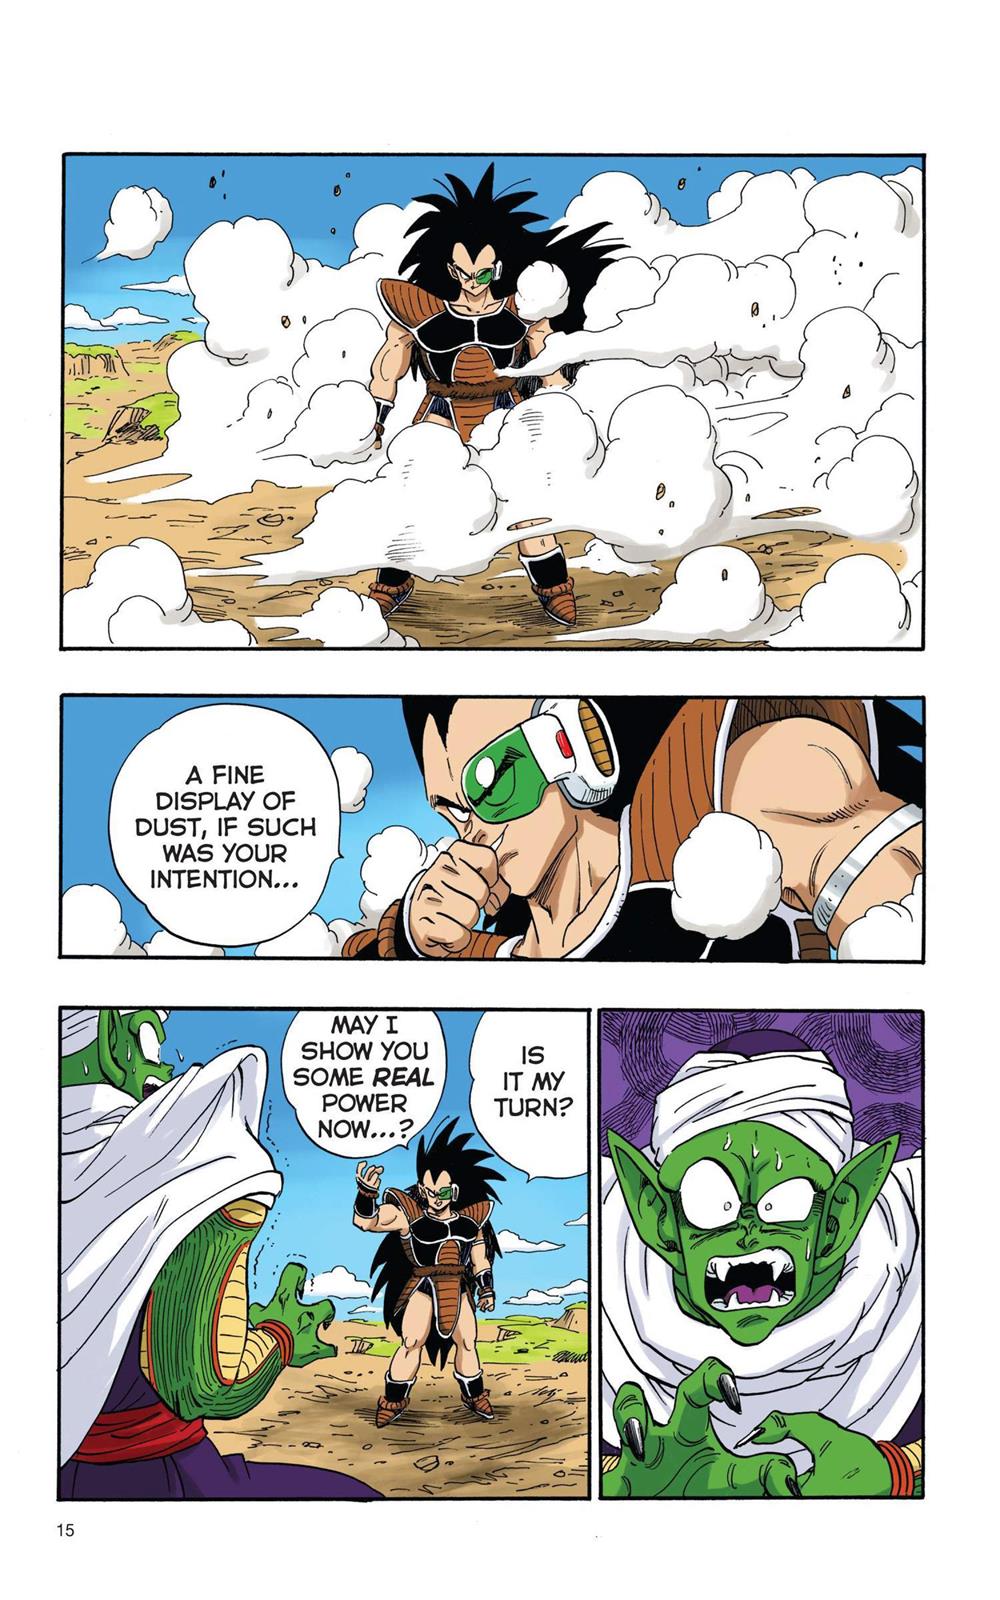 Dragon Ball Full Color Saiyan Arc Vol. 1 Ch. 1 The Mysterious Warrior From Space